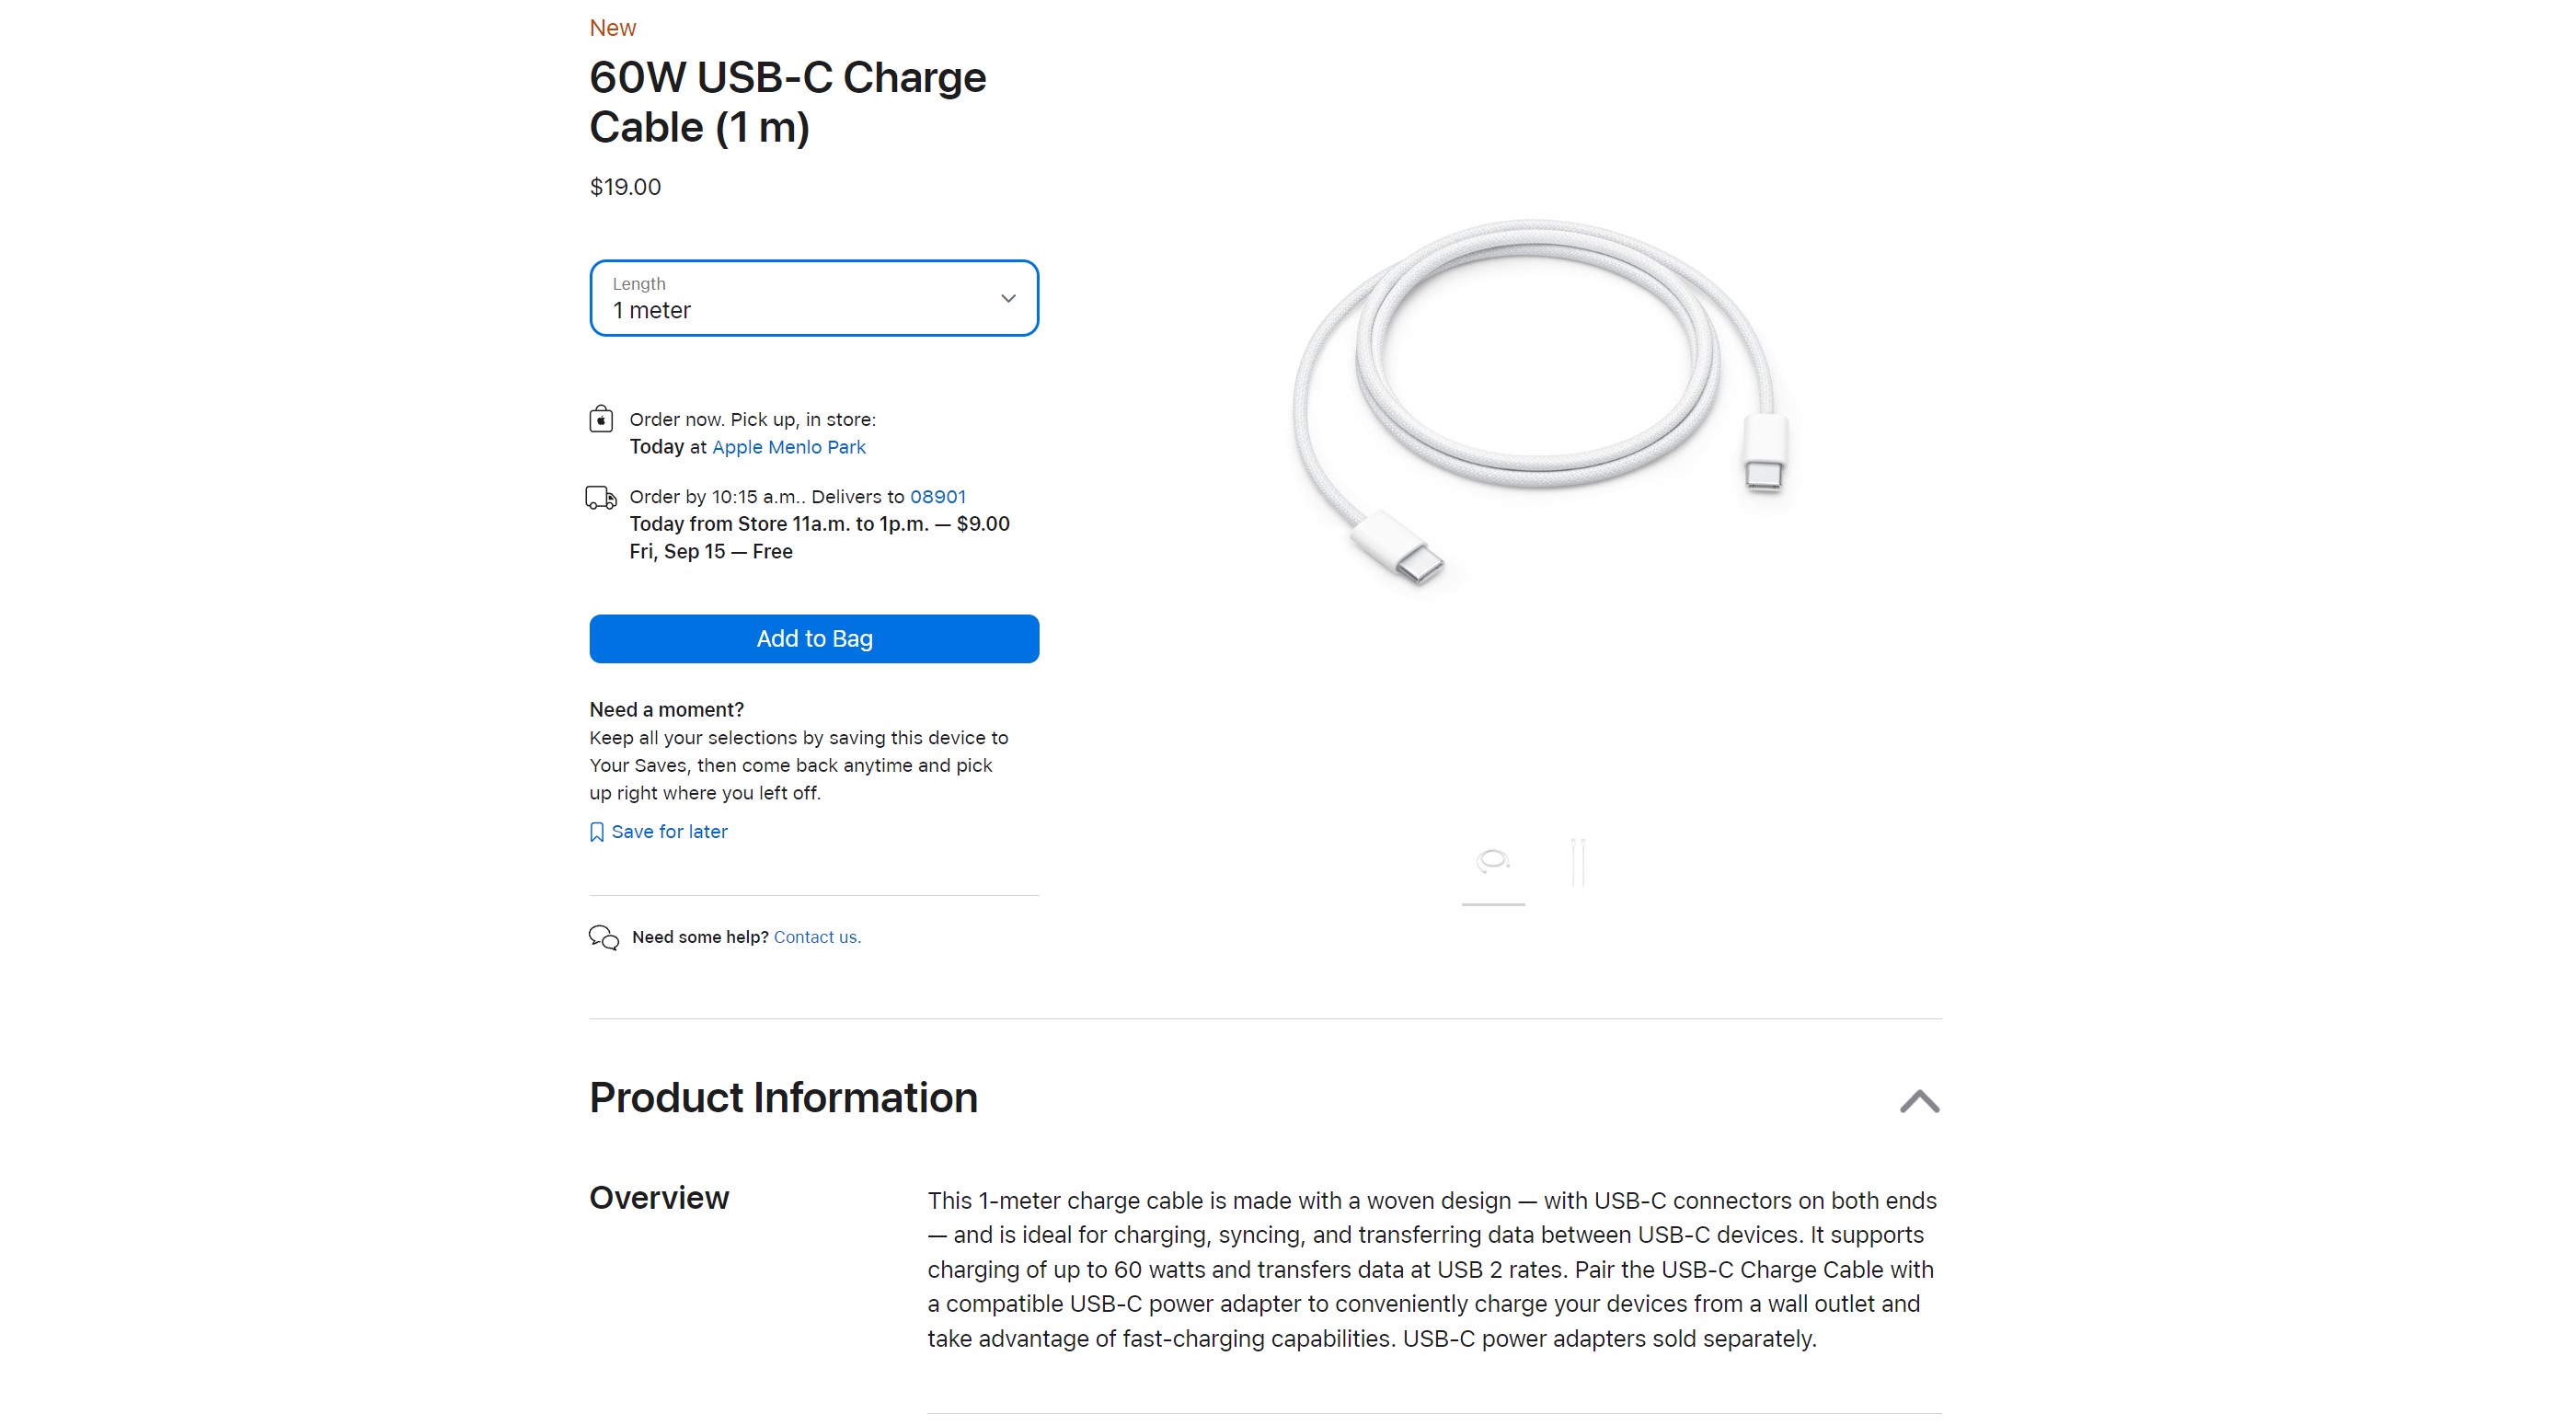 While it's nice that Apple is finally committing to USB-C on the iPhone, it's a bit disappointing to see the company's new USB-C Charge Cable only support USB 2 data speeds. 